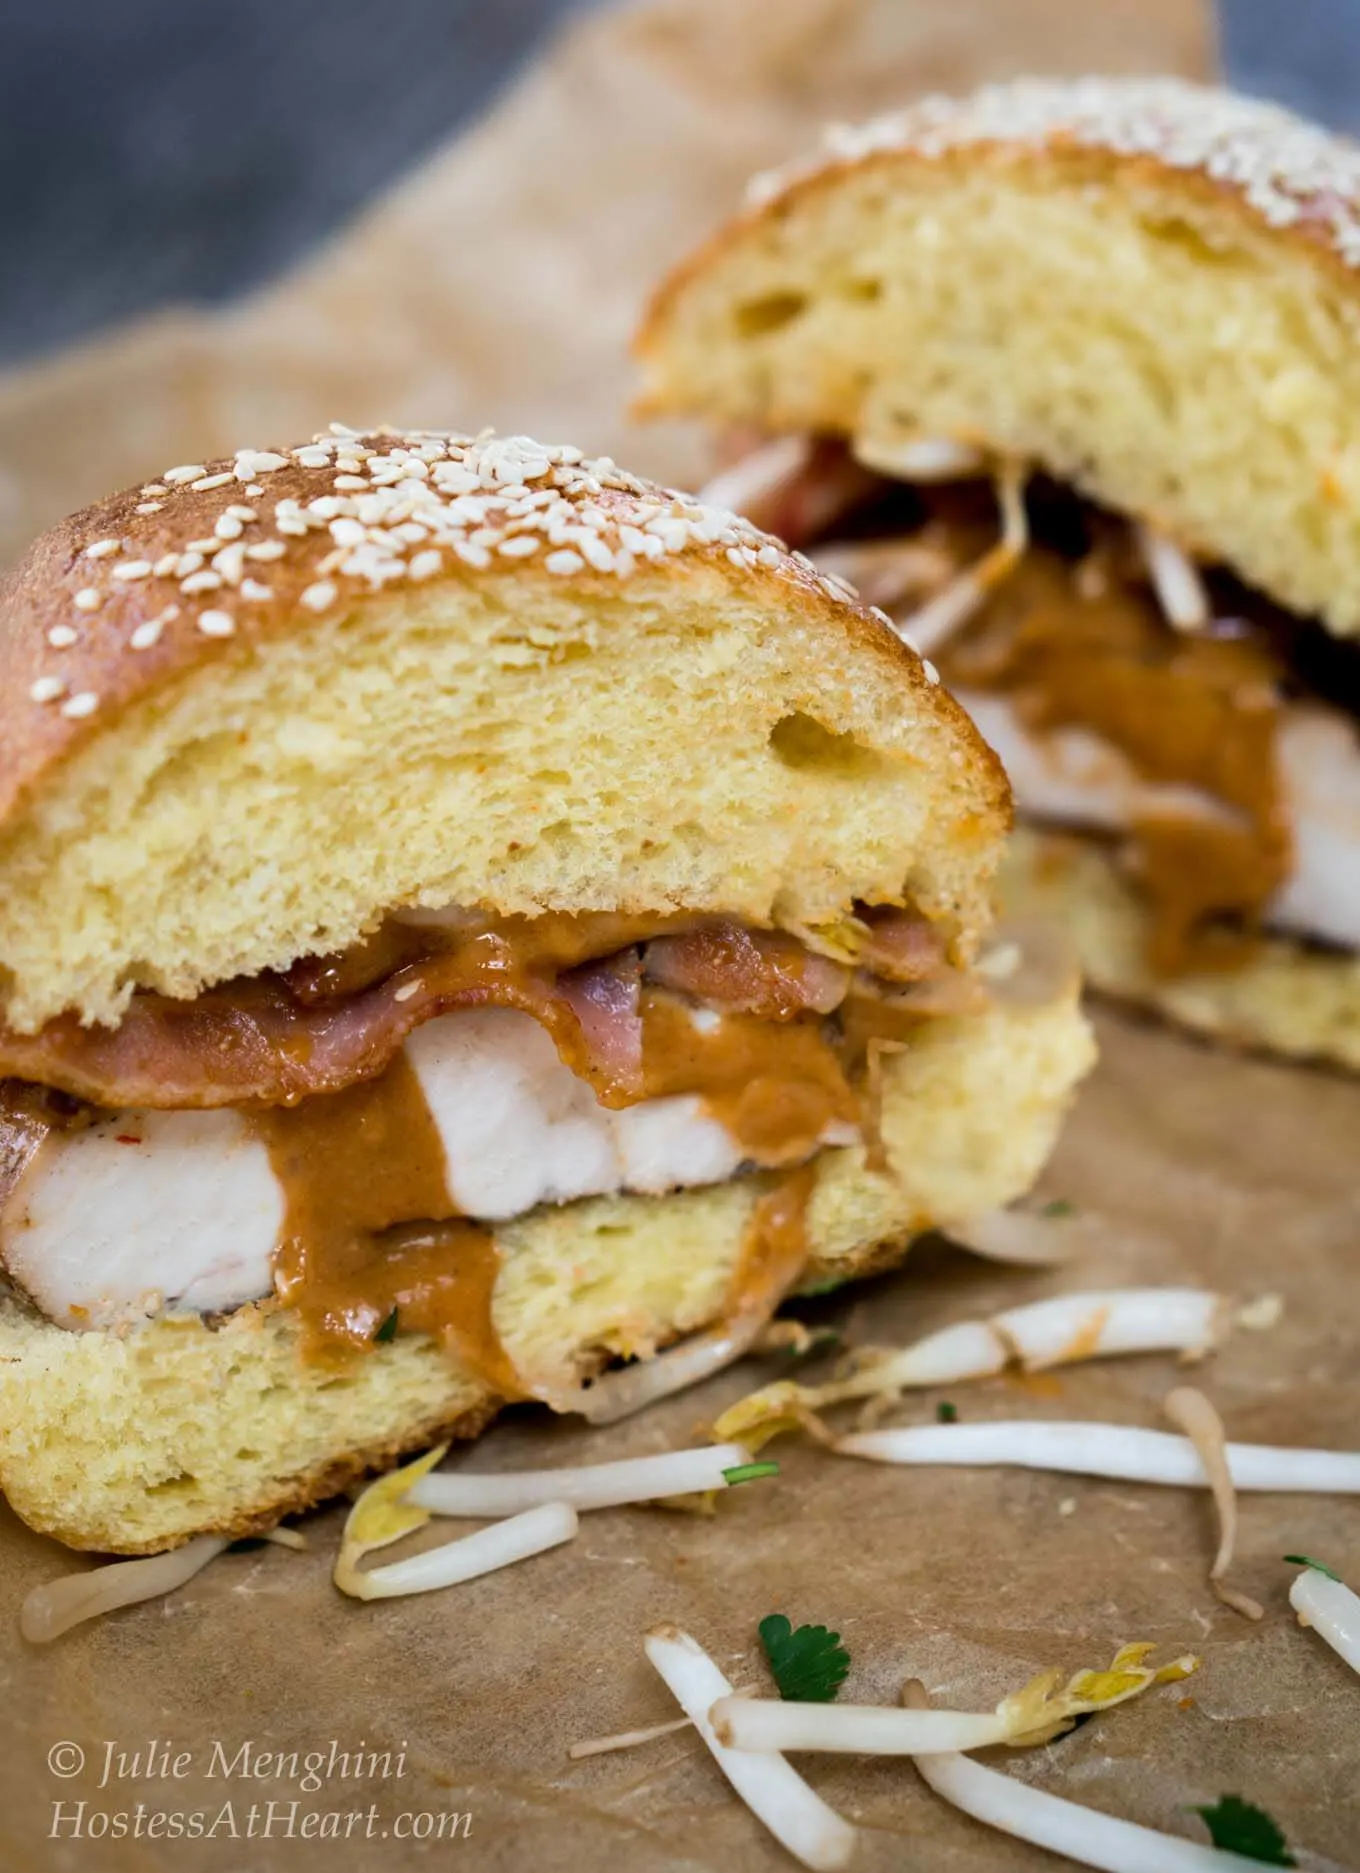 Two halves of a chicken sandwich layered with peanut sauce and bacon on a brioche bun.